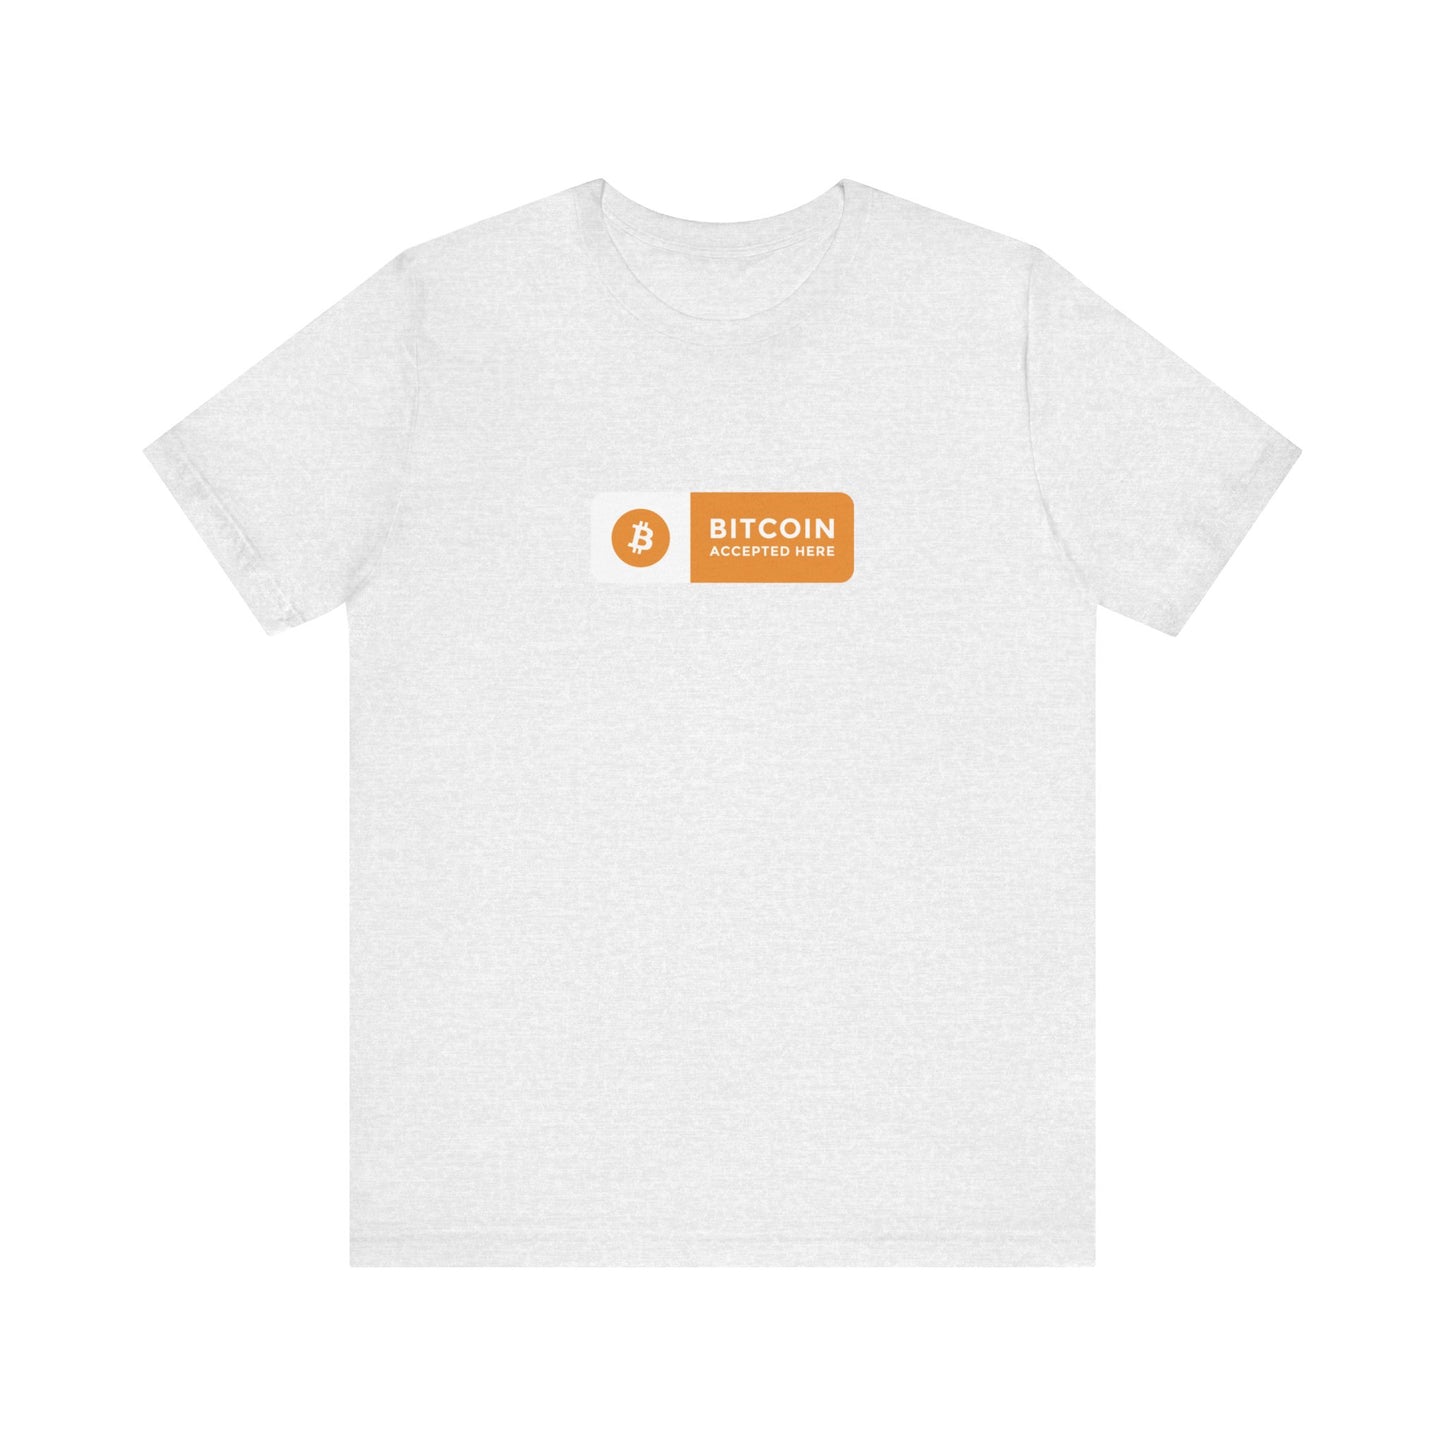 Bitcoin Accepted Here - Unisex T-Shirt